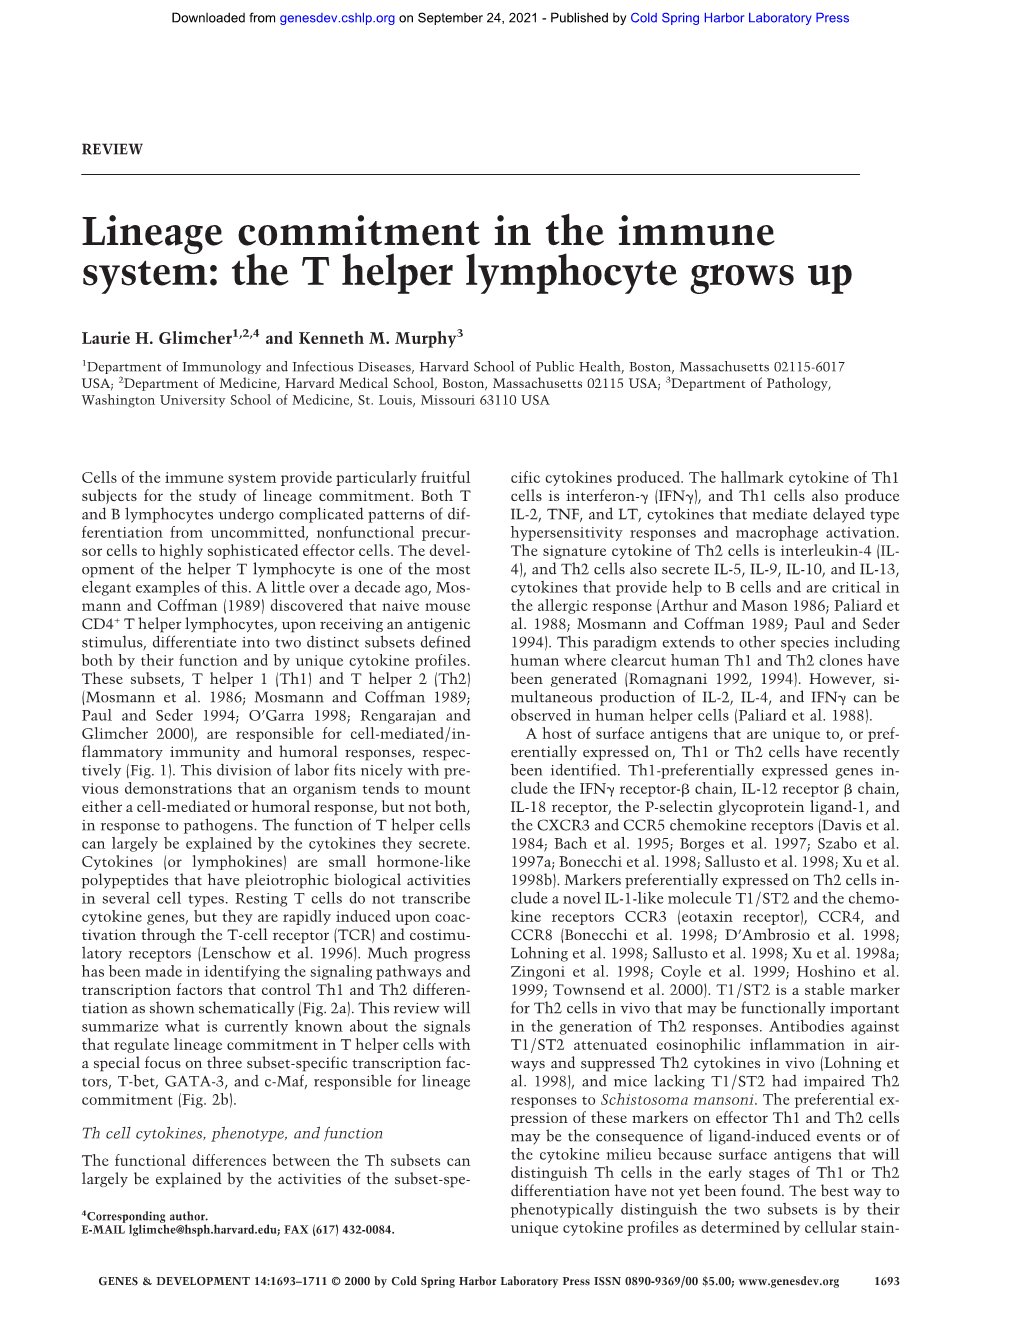 Lineage Commitment in the Immune System: the T Helper Lymphocyte Grows Up